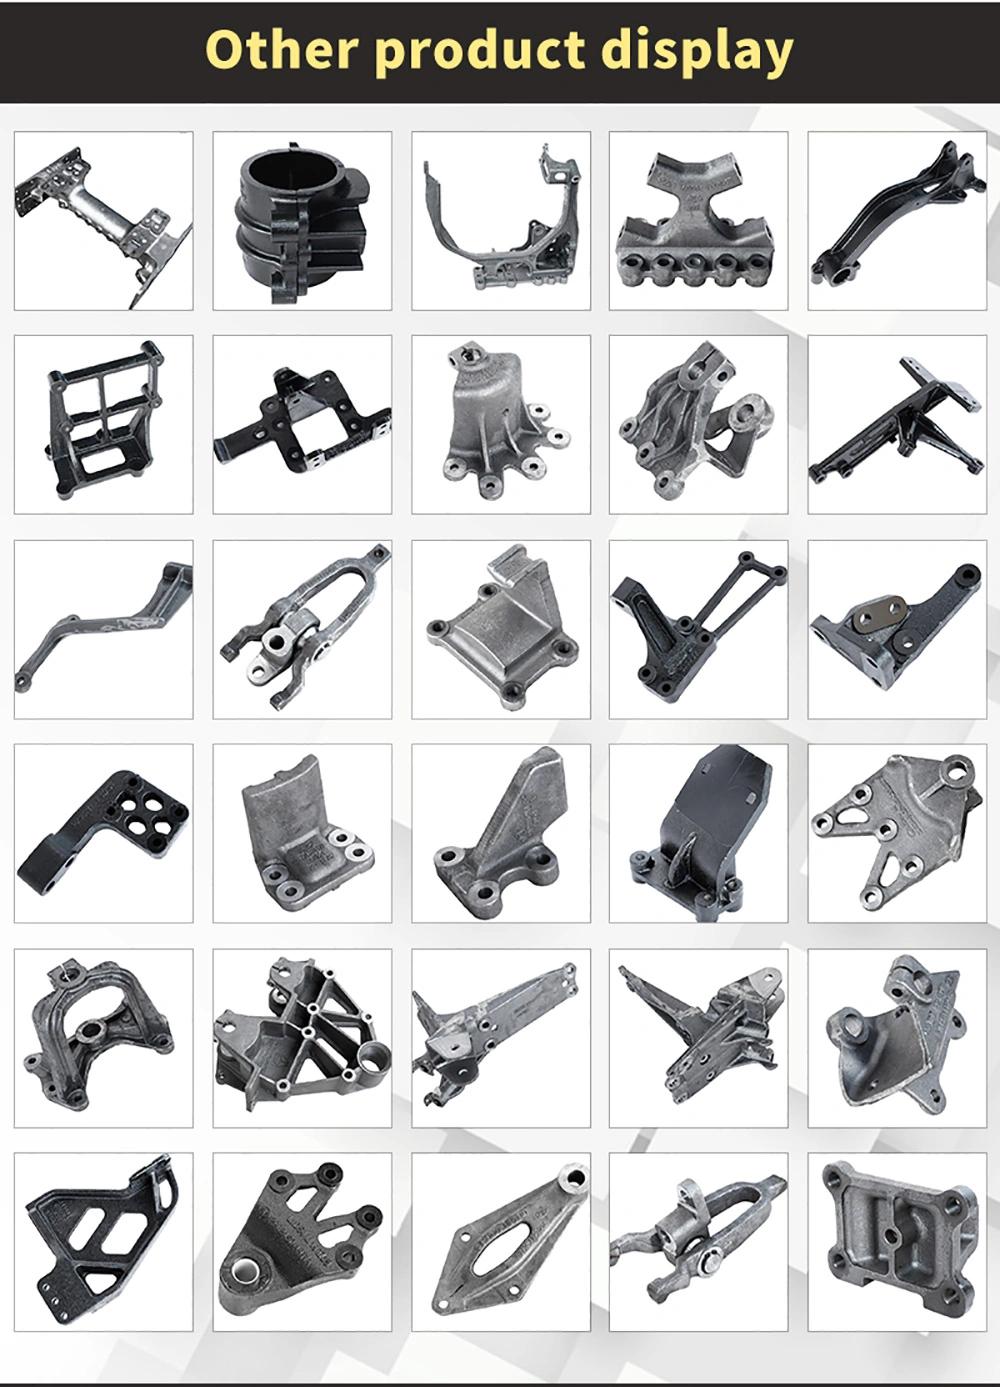 Grey Iron Casting Engineering & Construction Machinery Part